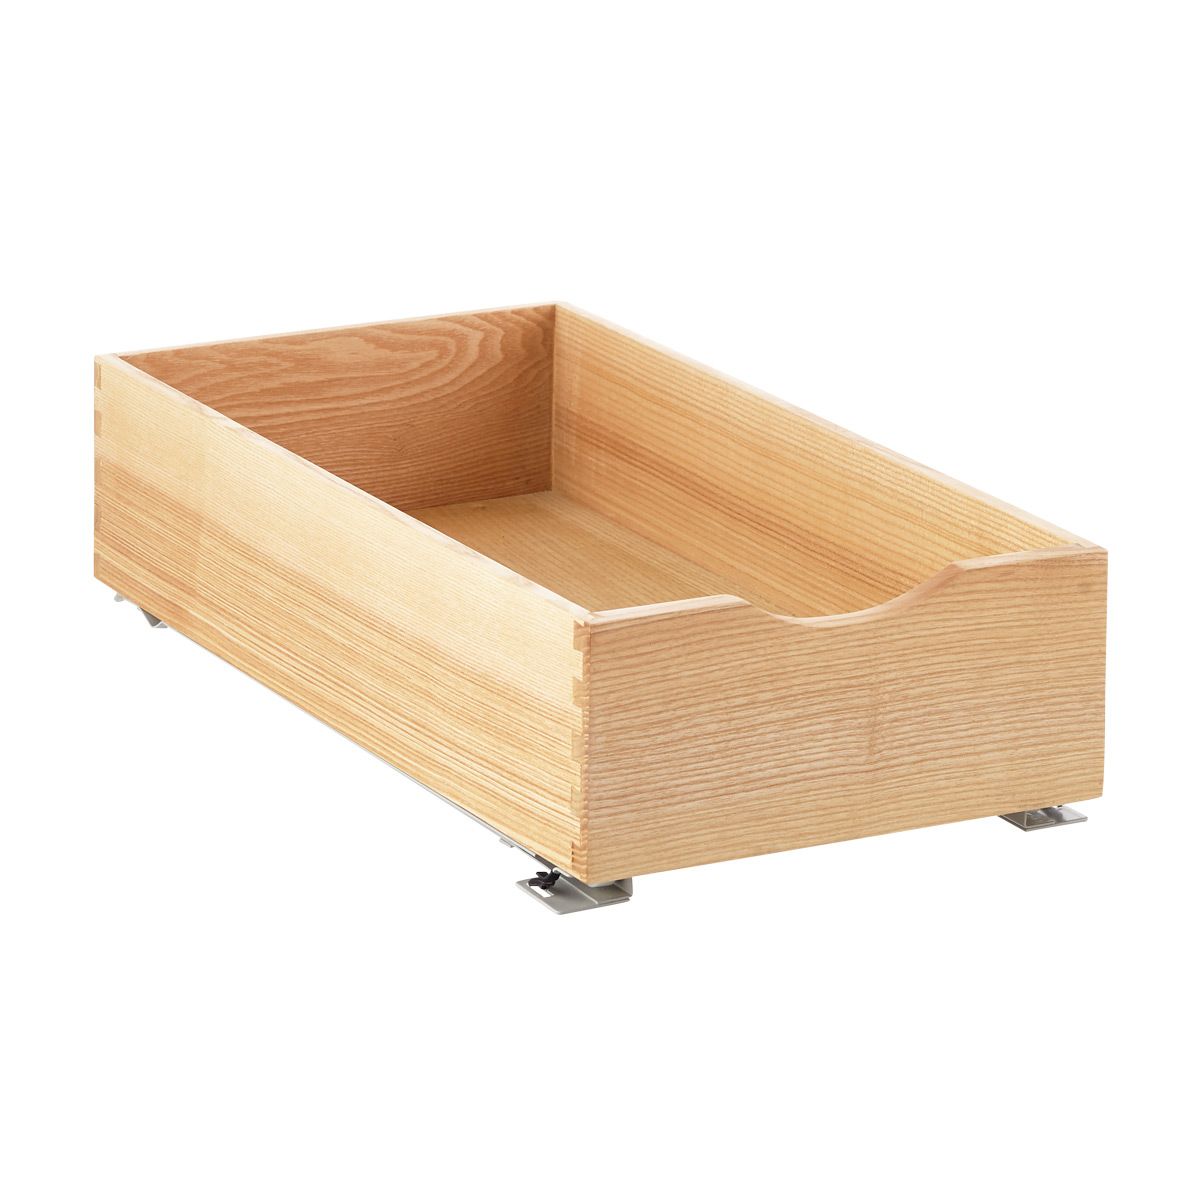 11" Roll-Out Cabinet Drawer Ash Wood | The Container Store